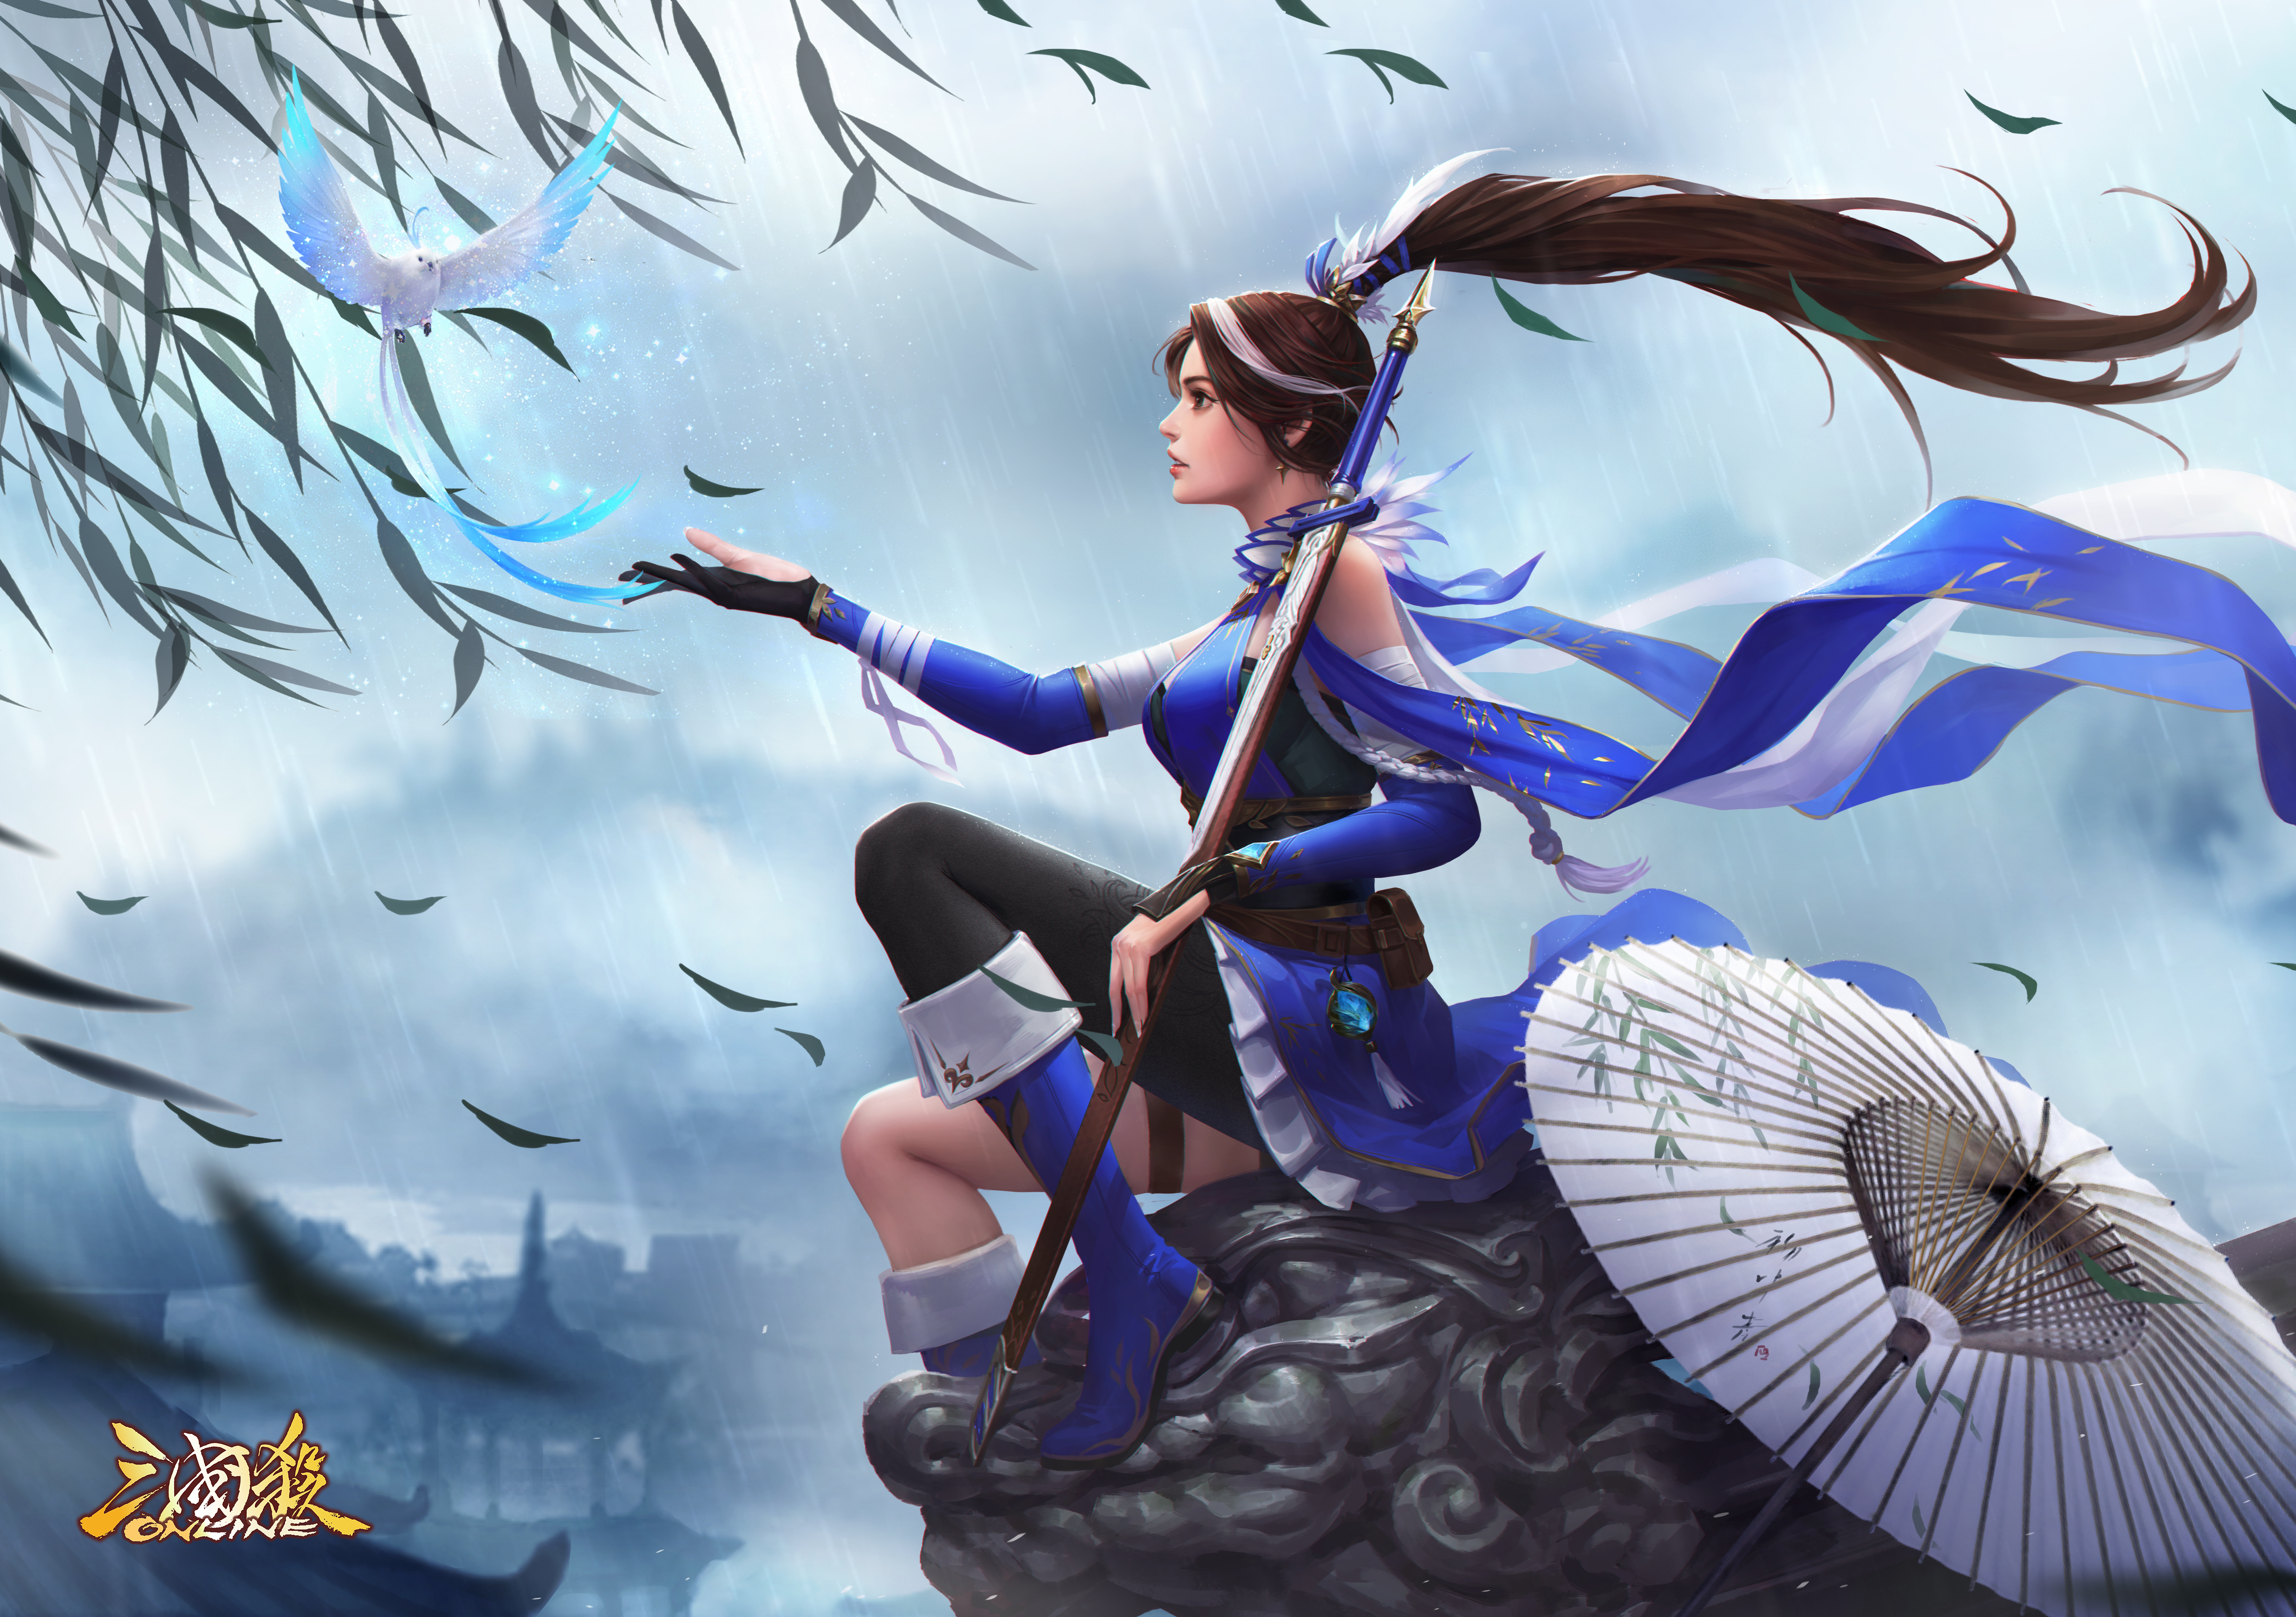 Three Kingdoms Video Game Characters Video Games Video Game Art Umbrella Video Game Girls Leaves Pon 4945x3483